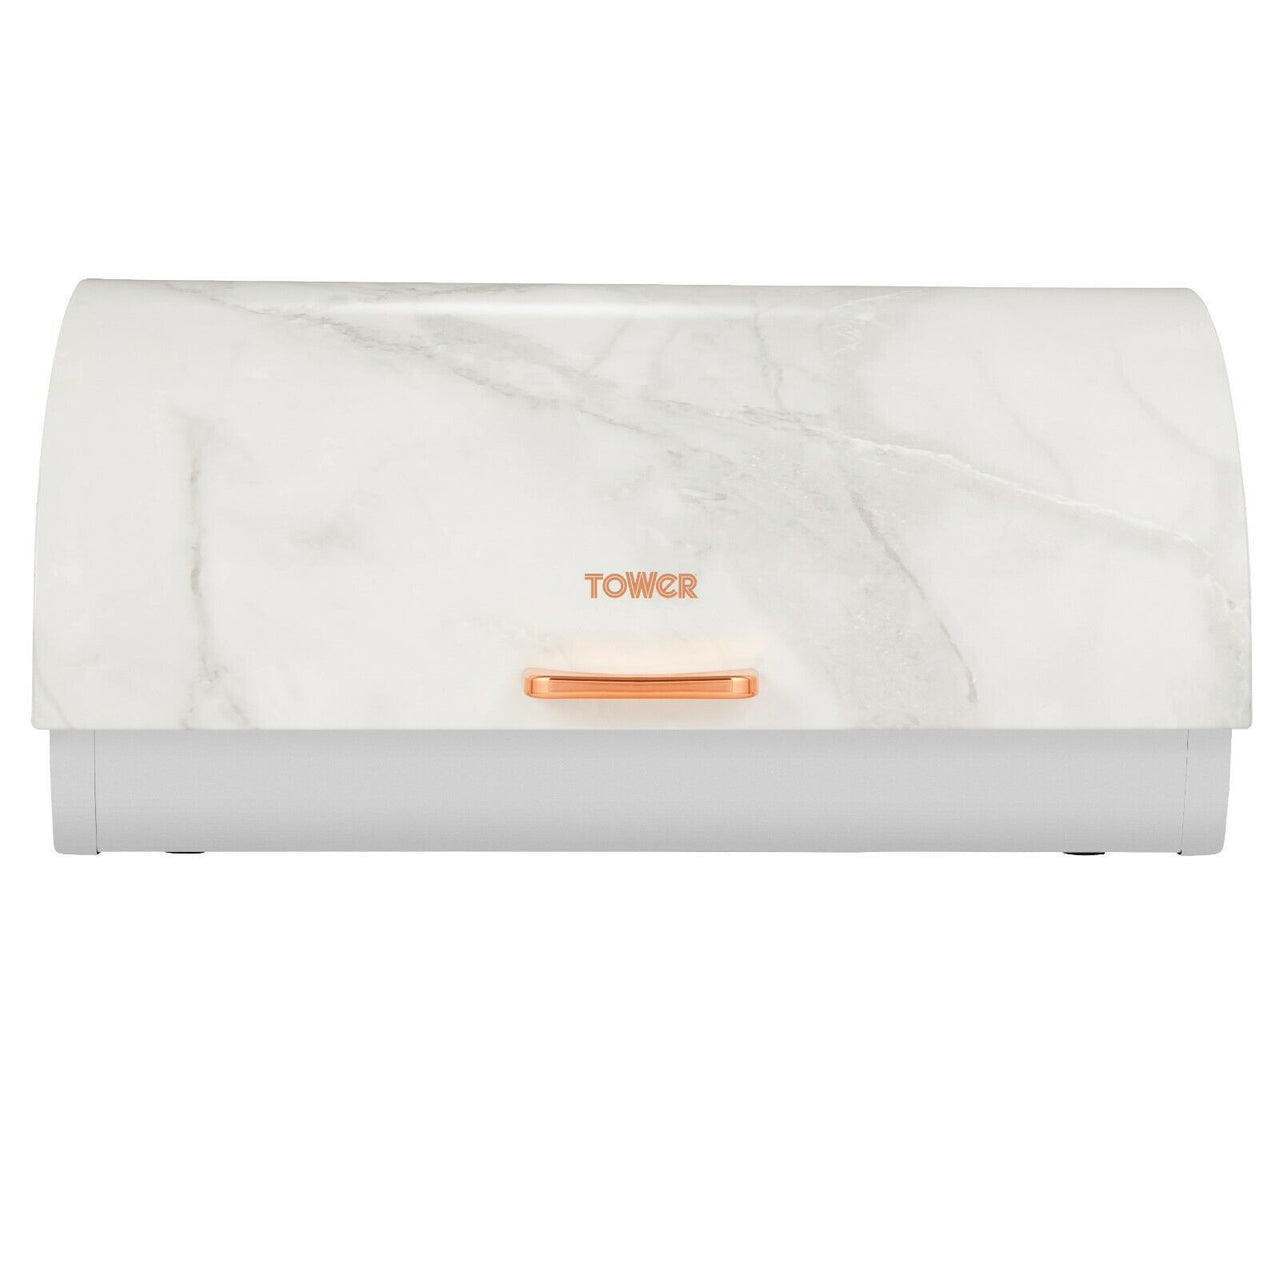 Tower Roll Top Bread Bin in White Marble with Rose Gold Kitchen Storage